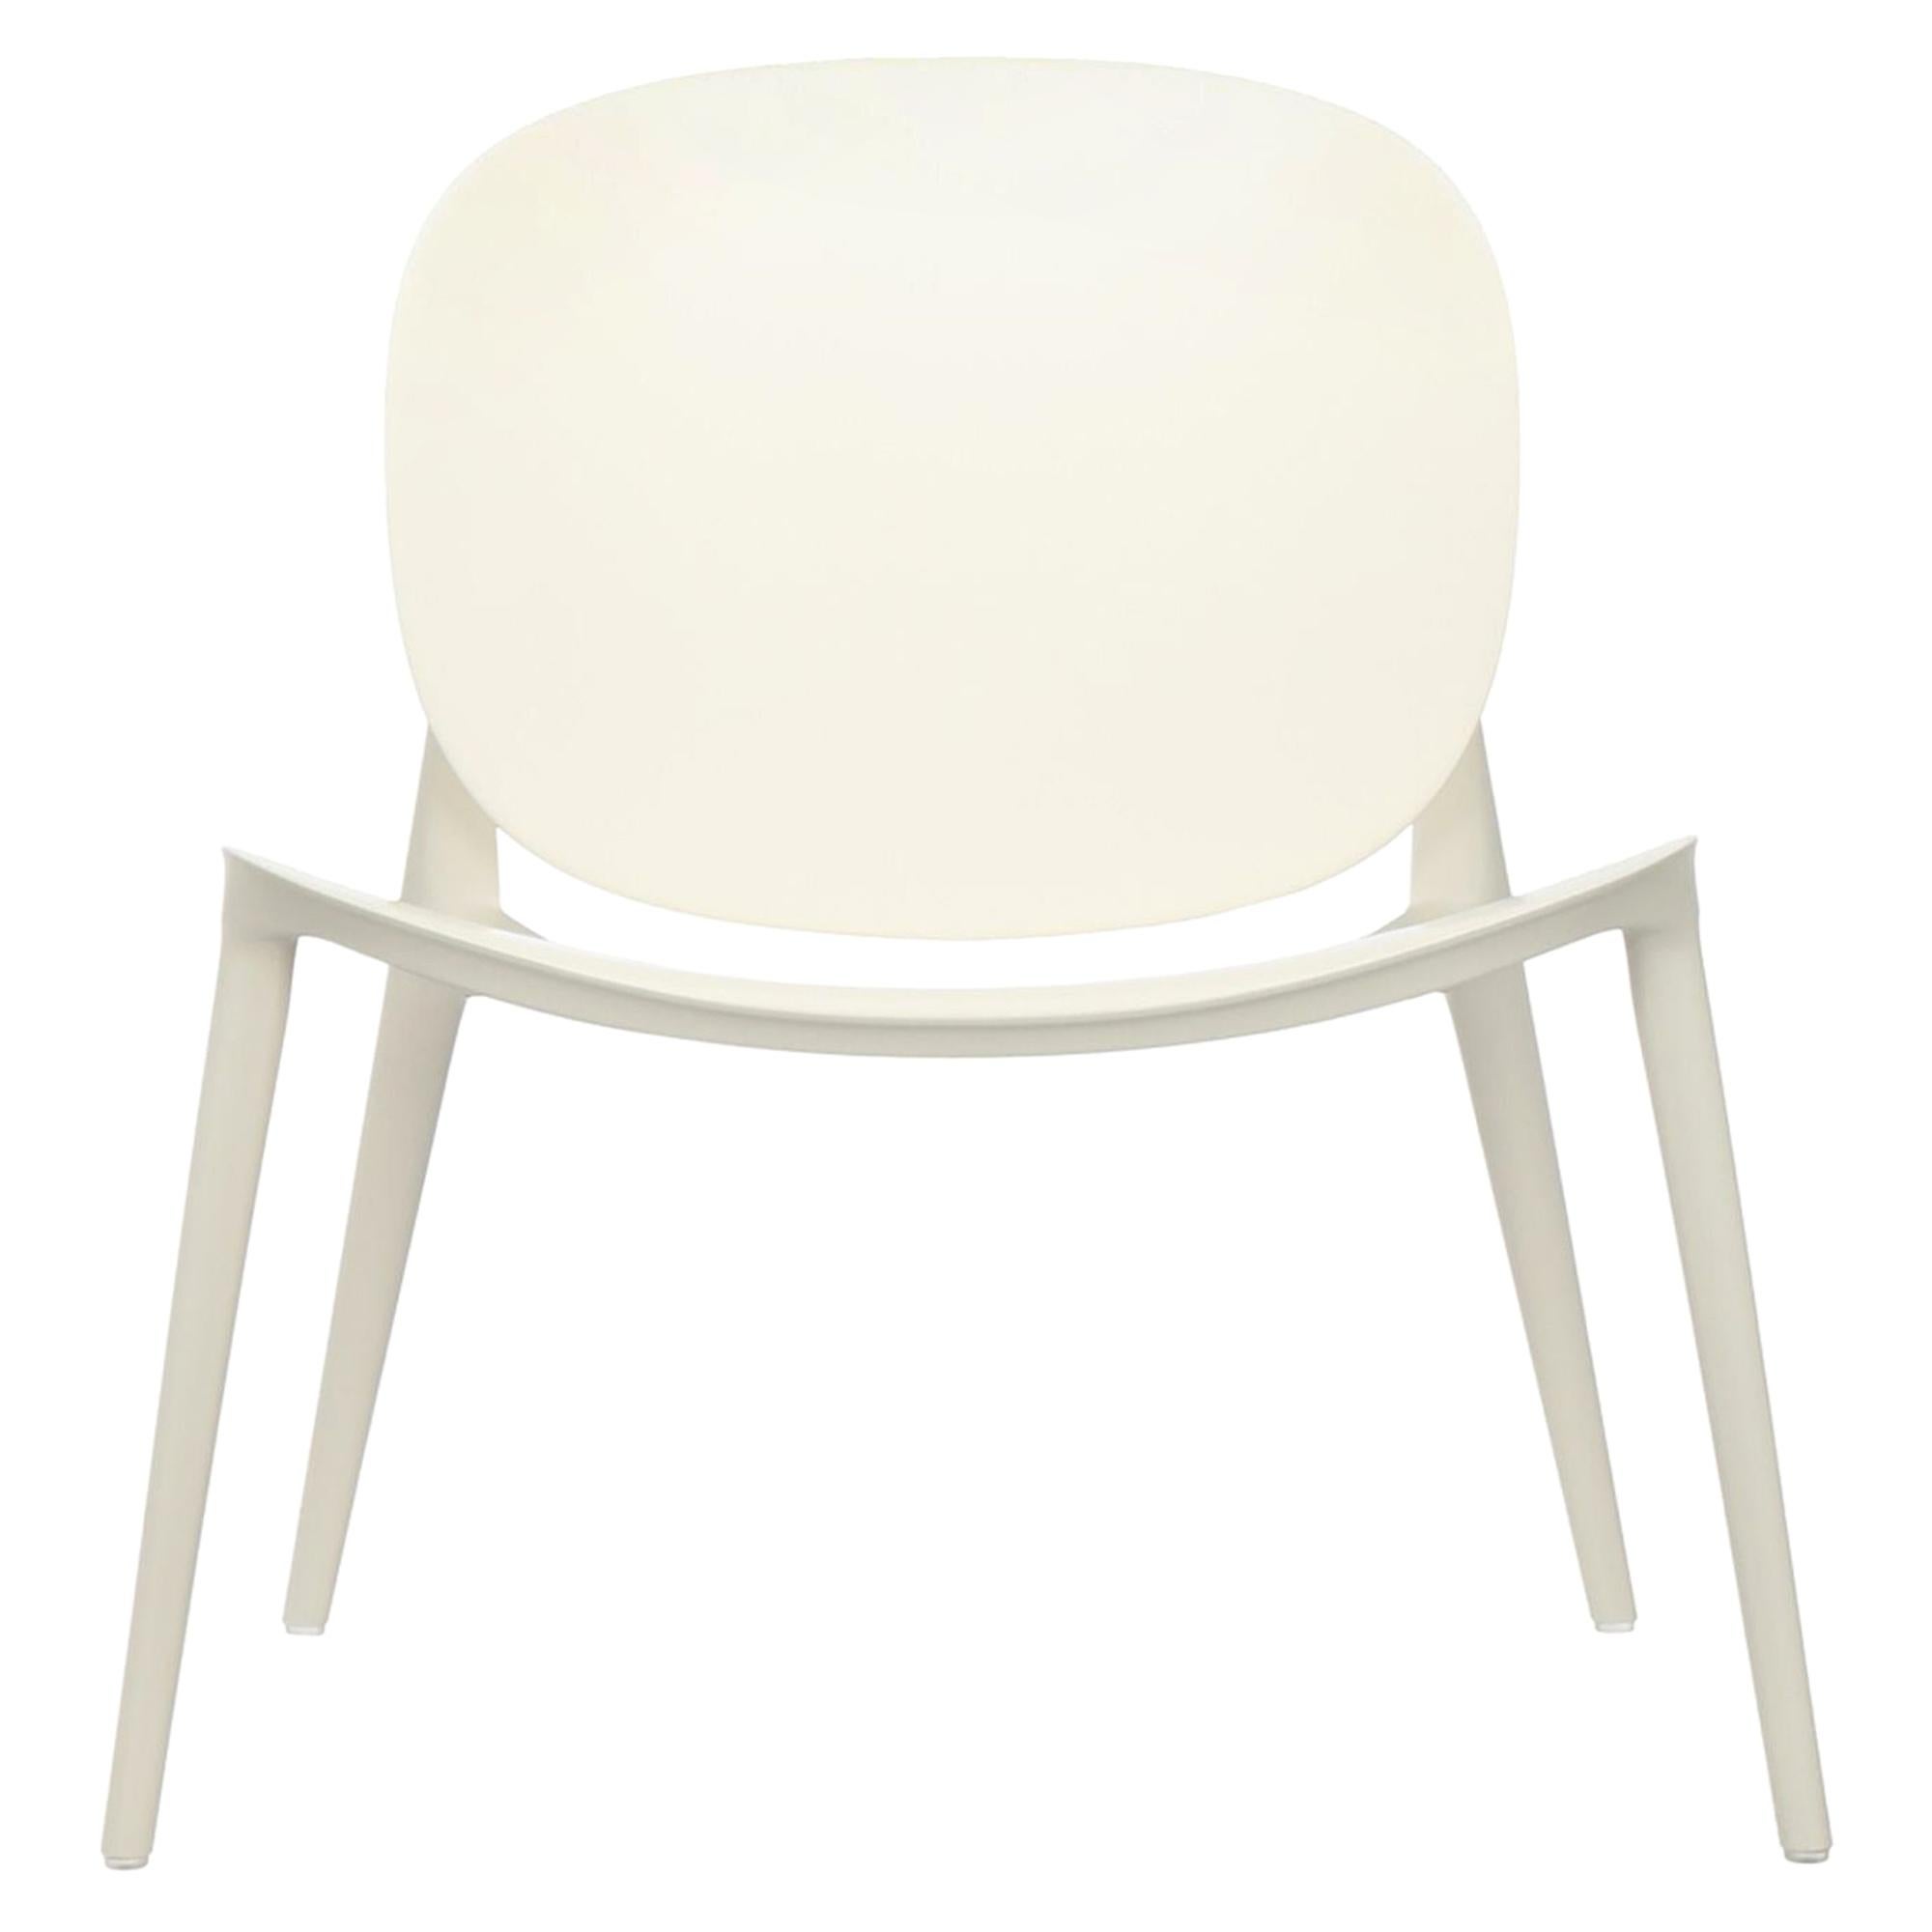 Kartell Be Bop in White by Ludovica + Roberta Palomba